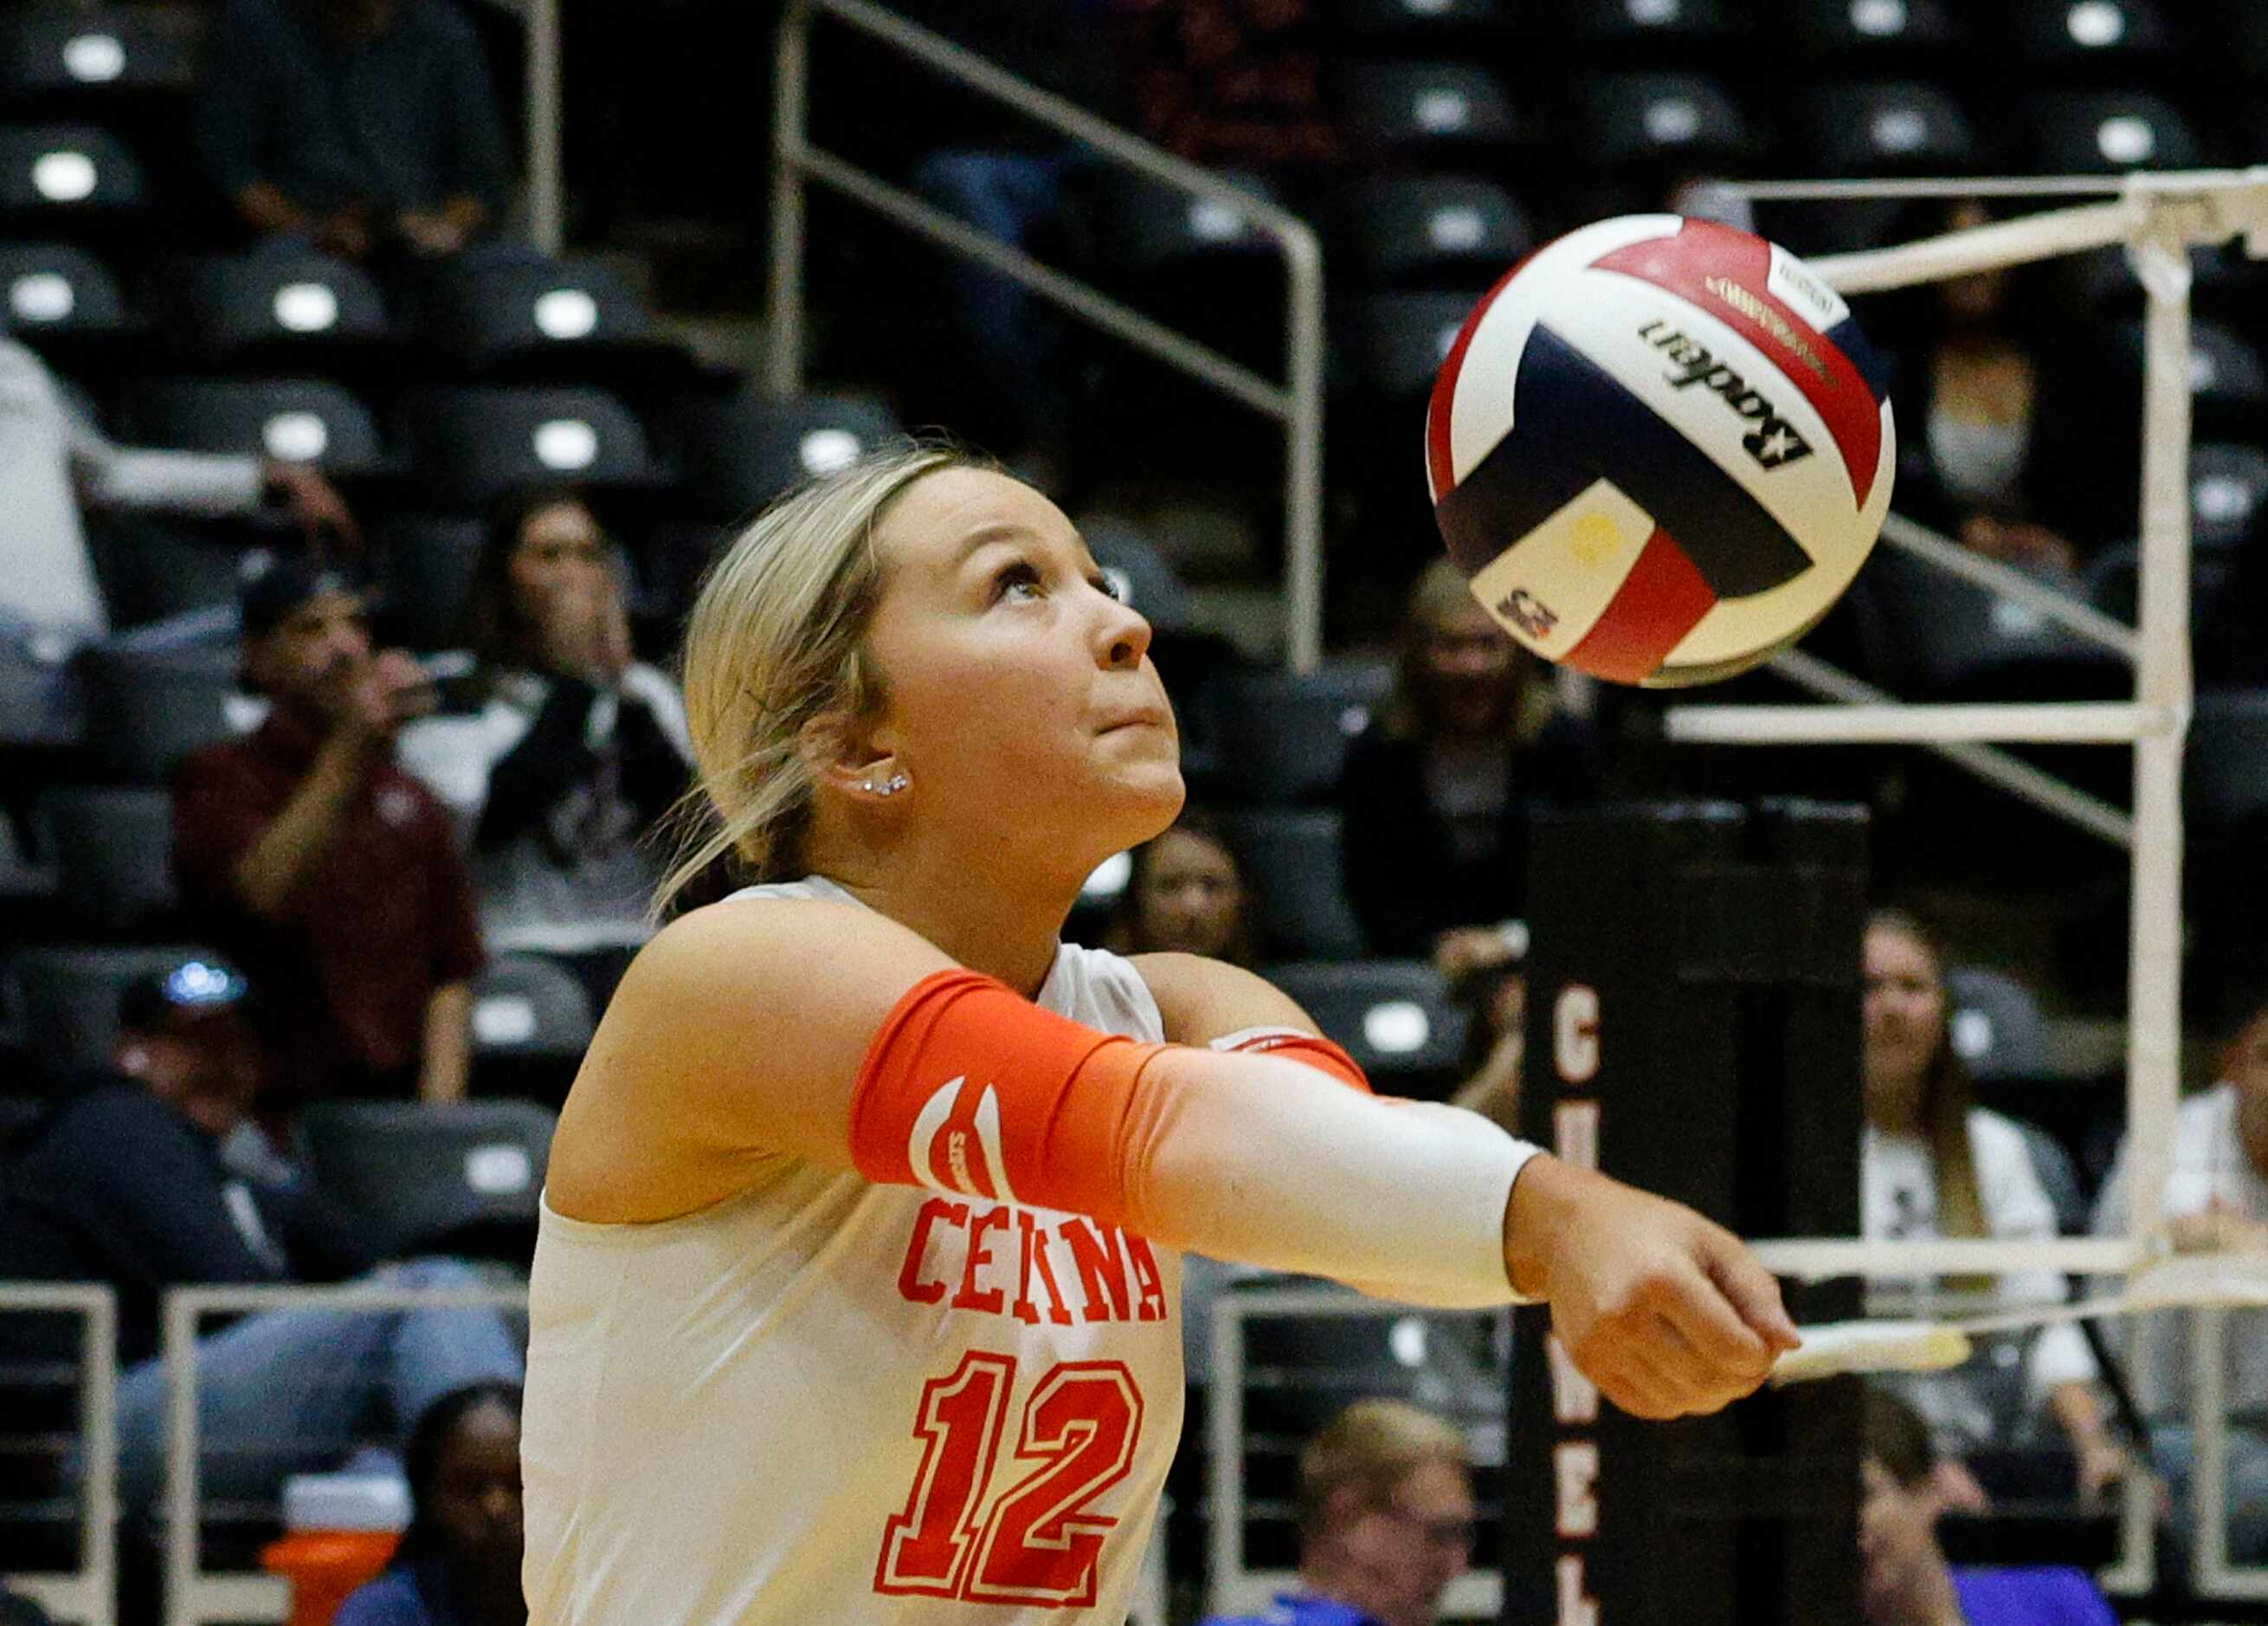 Celina's Reagan Radtke (12) digs the ball against Comal Davenport in the second set during a...